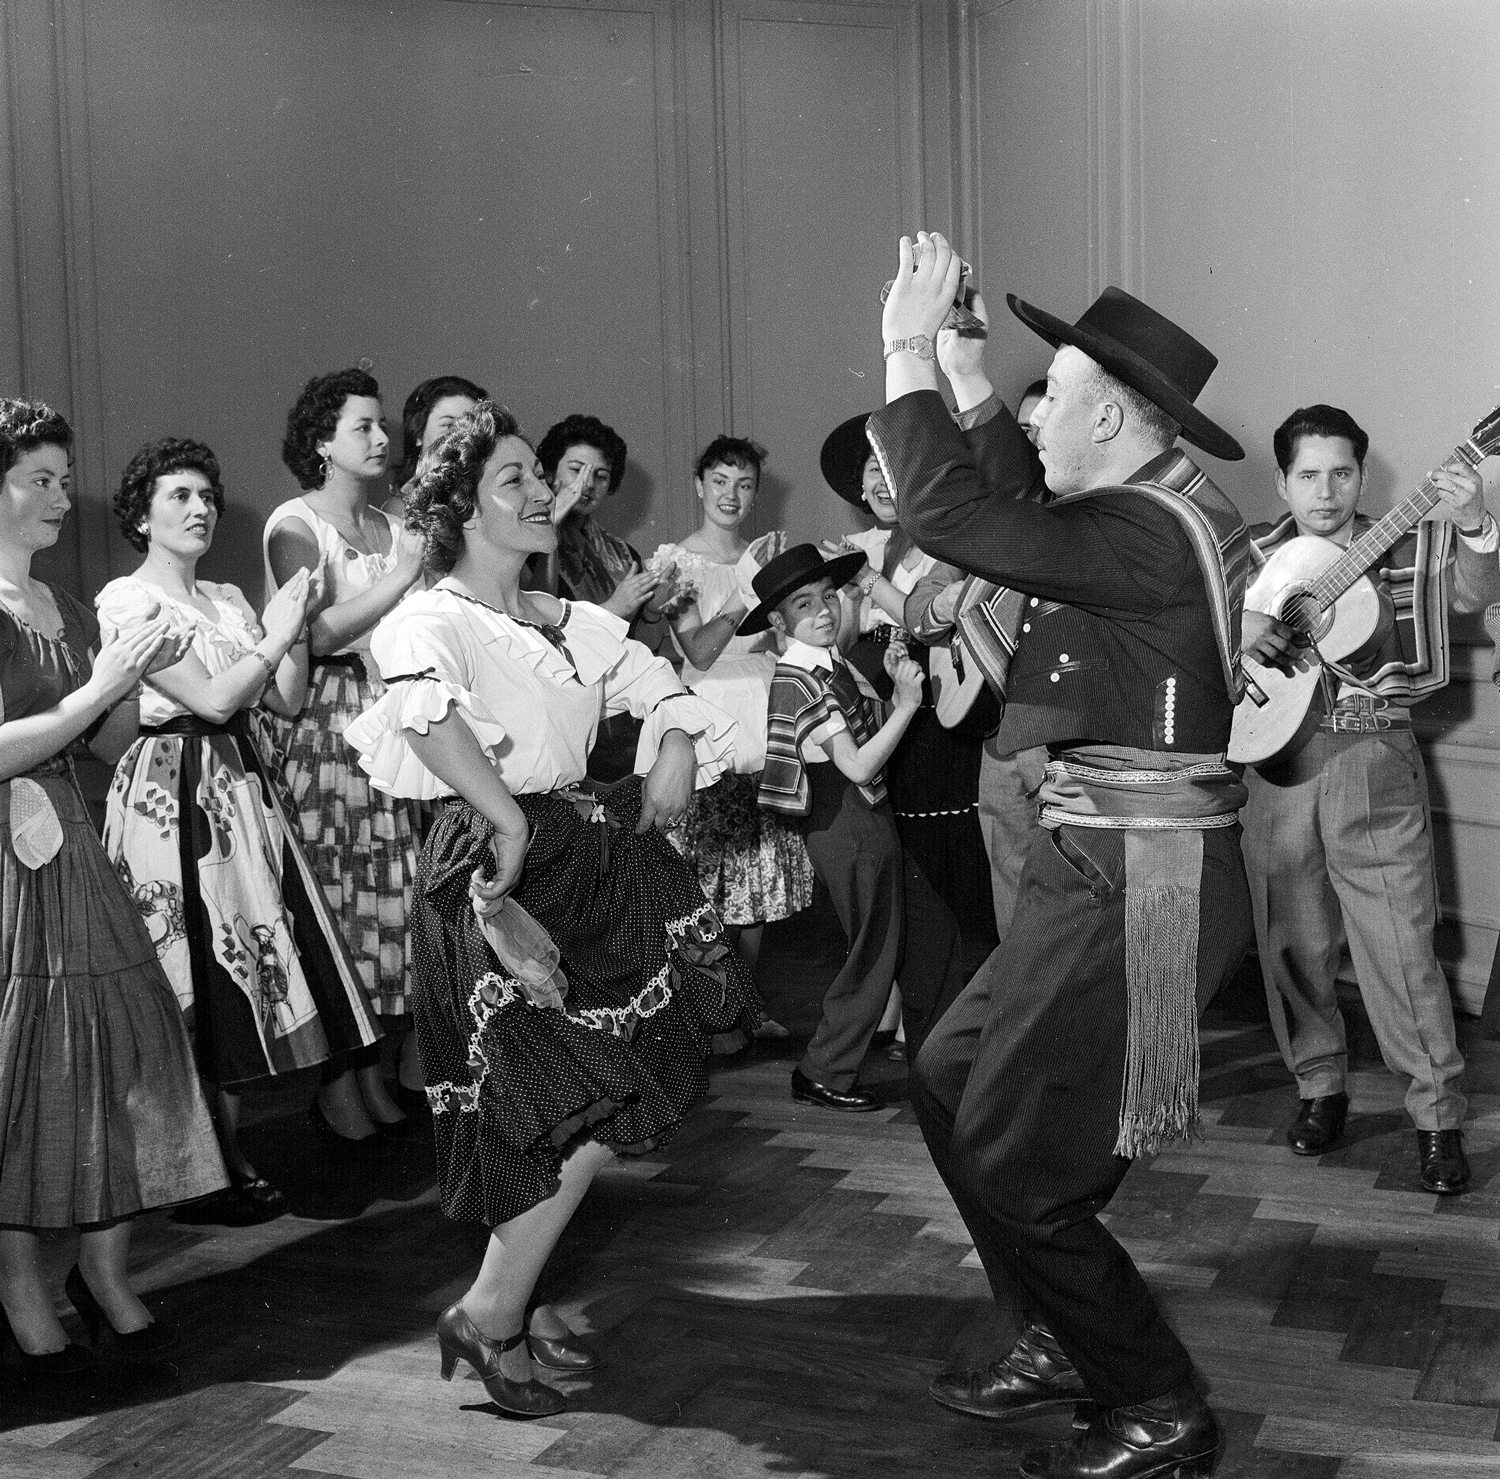 The fraught history of Chile’s national dance